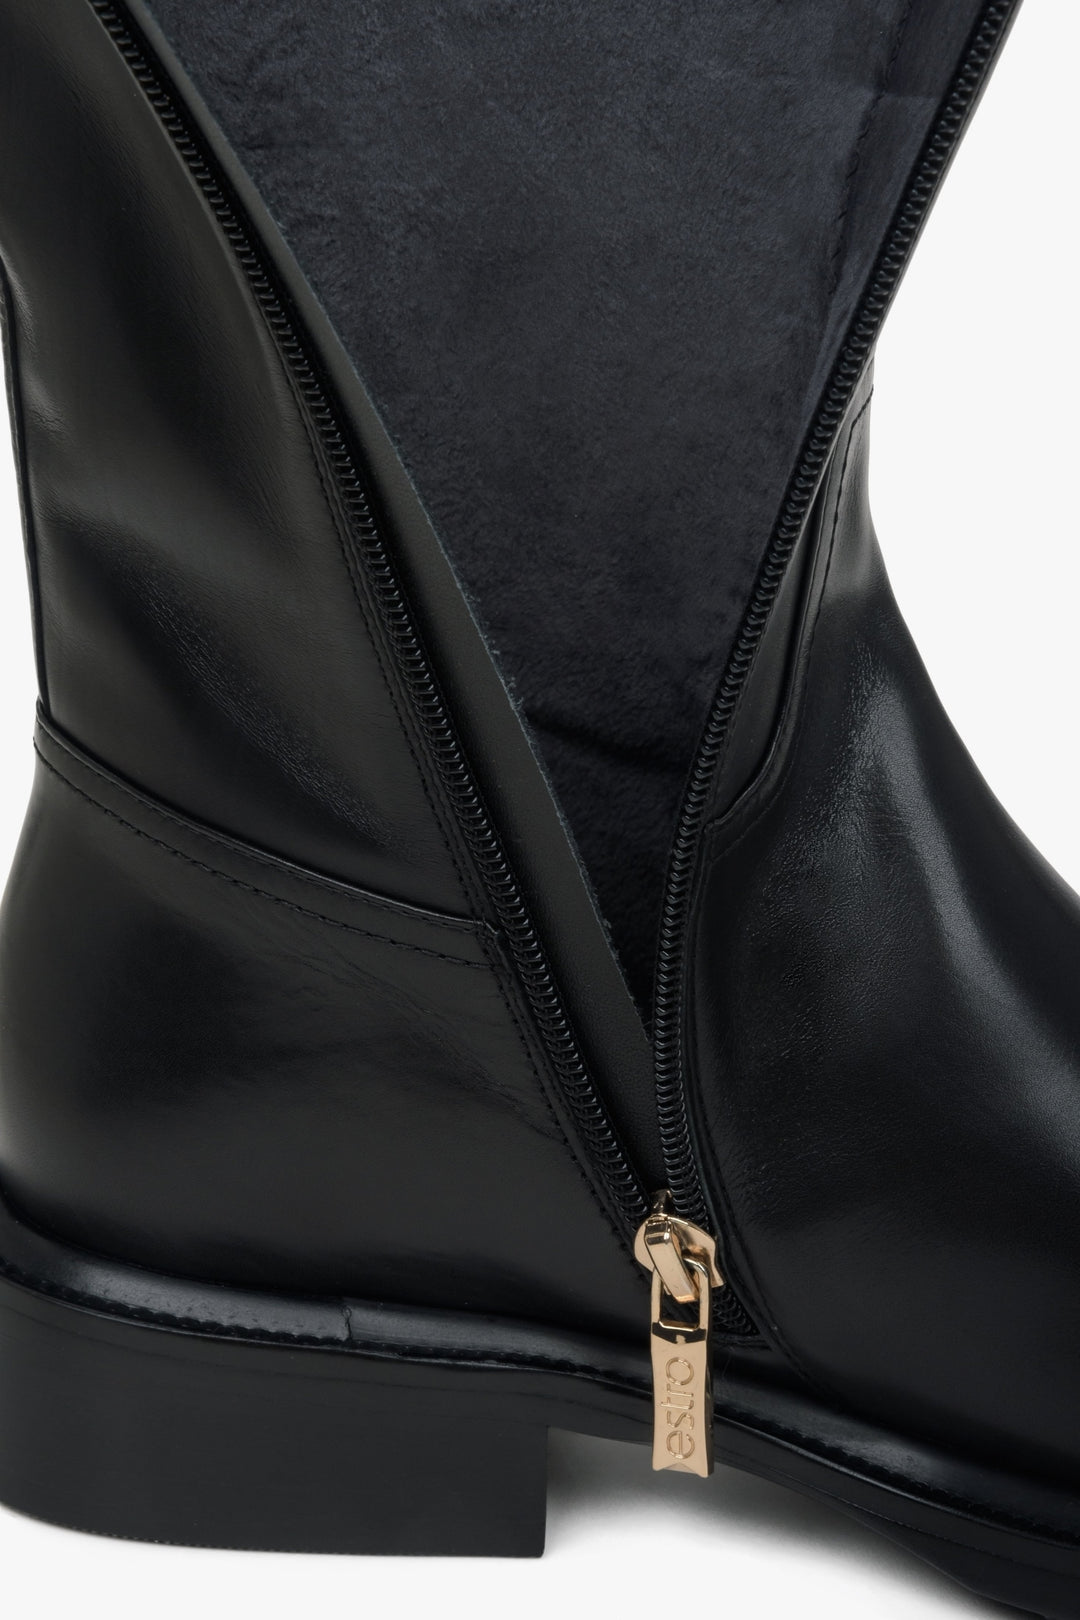 Women's black leather boots - close-up on the details.